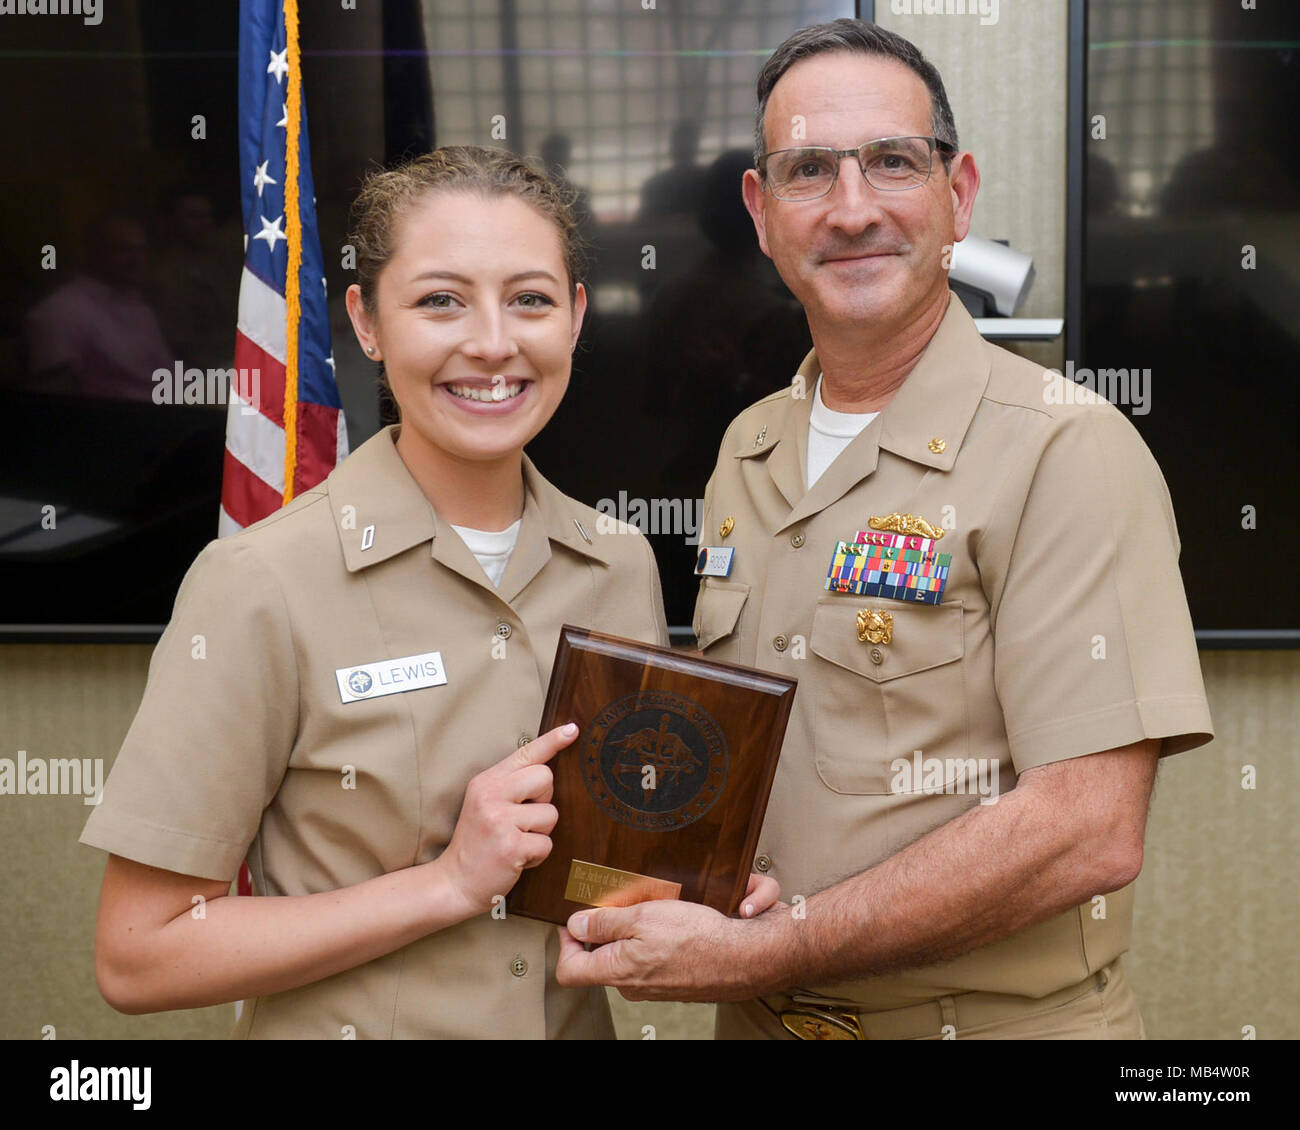 SAN DIEGO (Feb. 16, 2018) CAPT. Joel Roos, Naval Medical Center San Diego Commanding Officer,  presents Hospital Corpsman Jasmine Lewis with the Bluejacket of the Quarter award. Hospital Corpsman Lewis received the award for her exceptional work and devotion to duty. Stock Photo